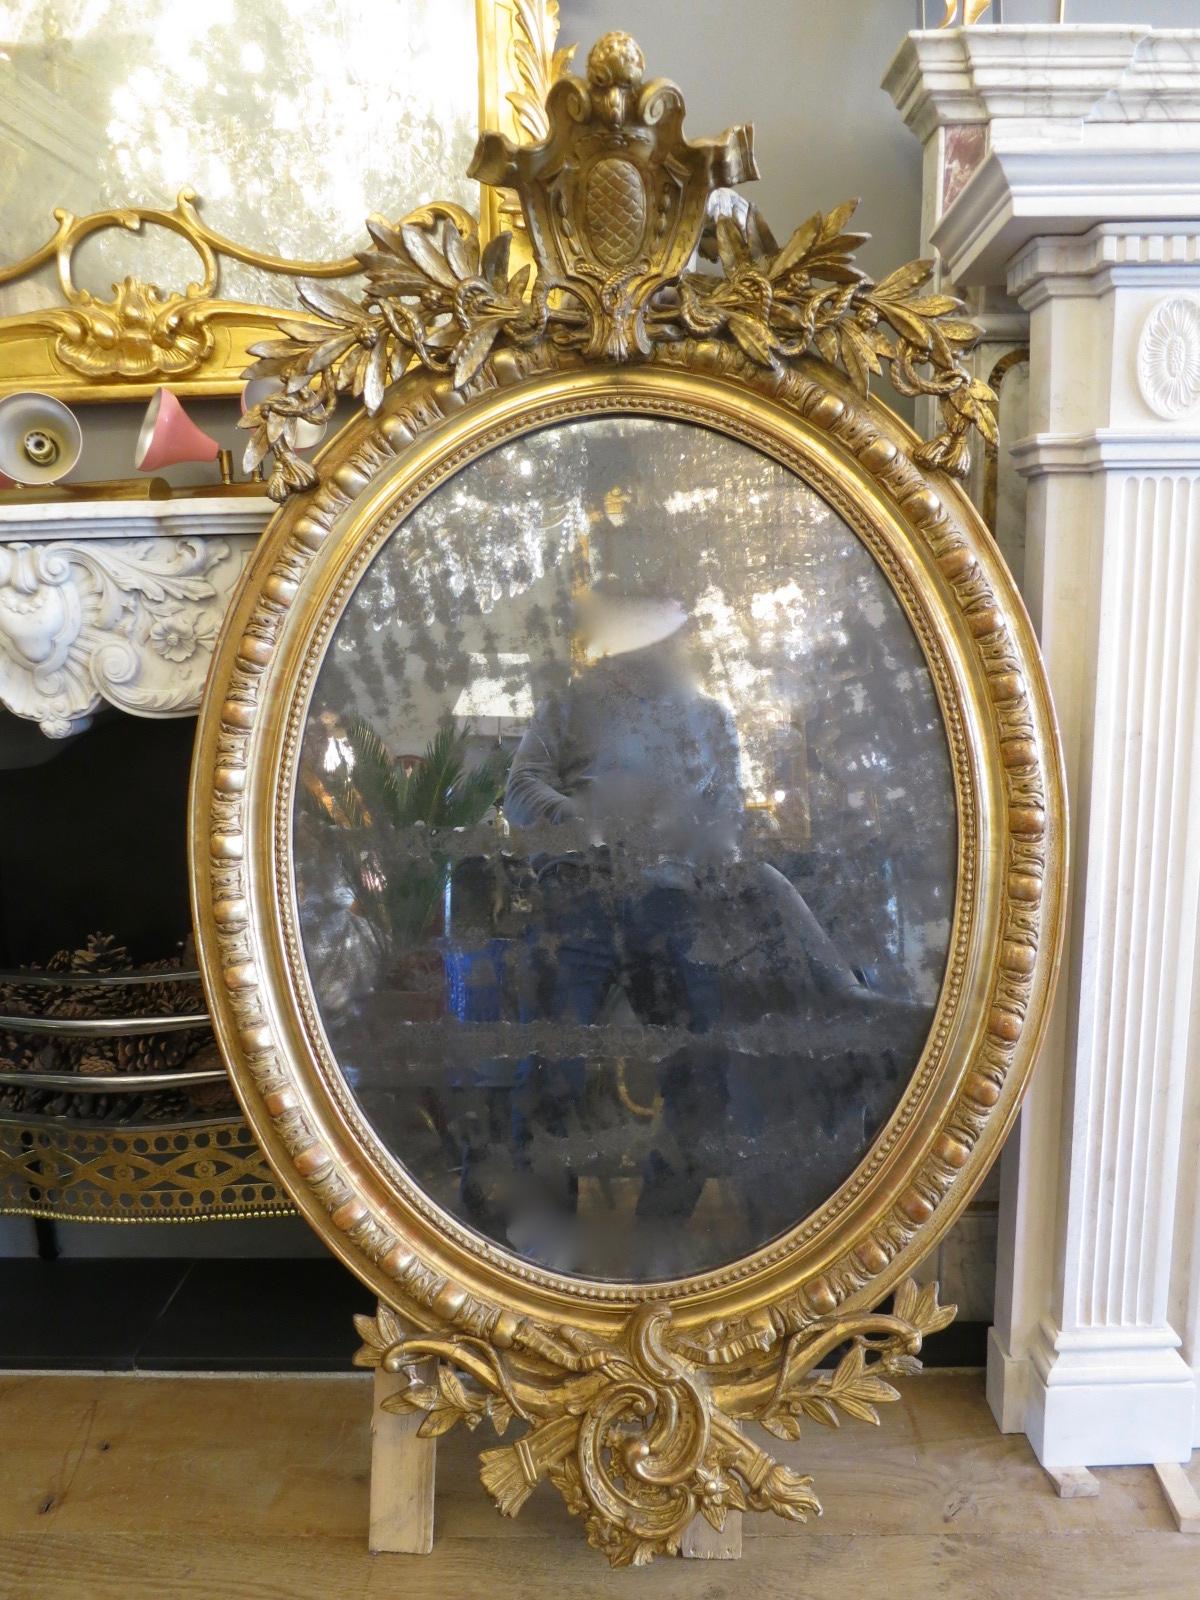 A late 19th century French gold gilt oval mirror with crested pediment flanked by tied laurel. The frame with egg and dart molding and inner beaded slip, with C-scroll, torch and quiver again flanked by tied laurel to bottom. The original plate